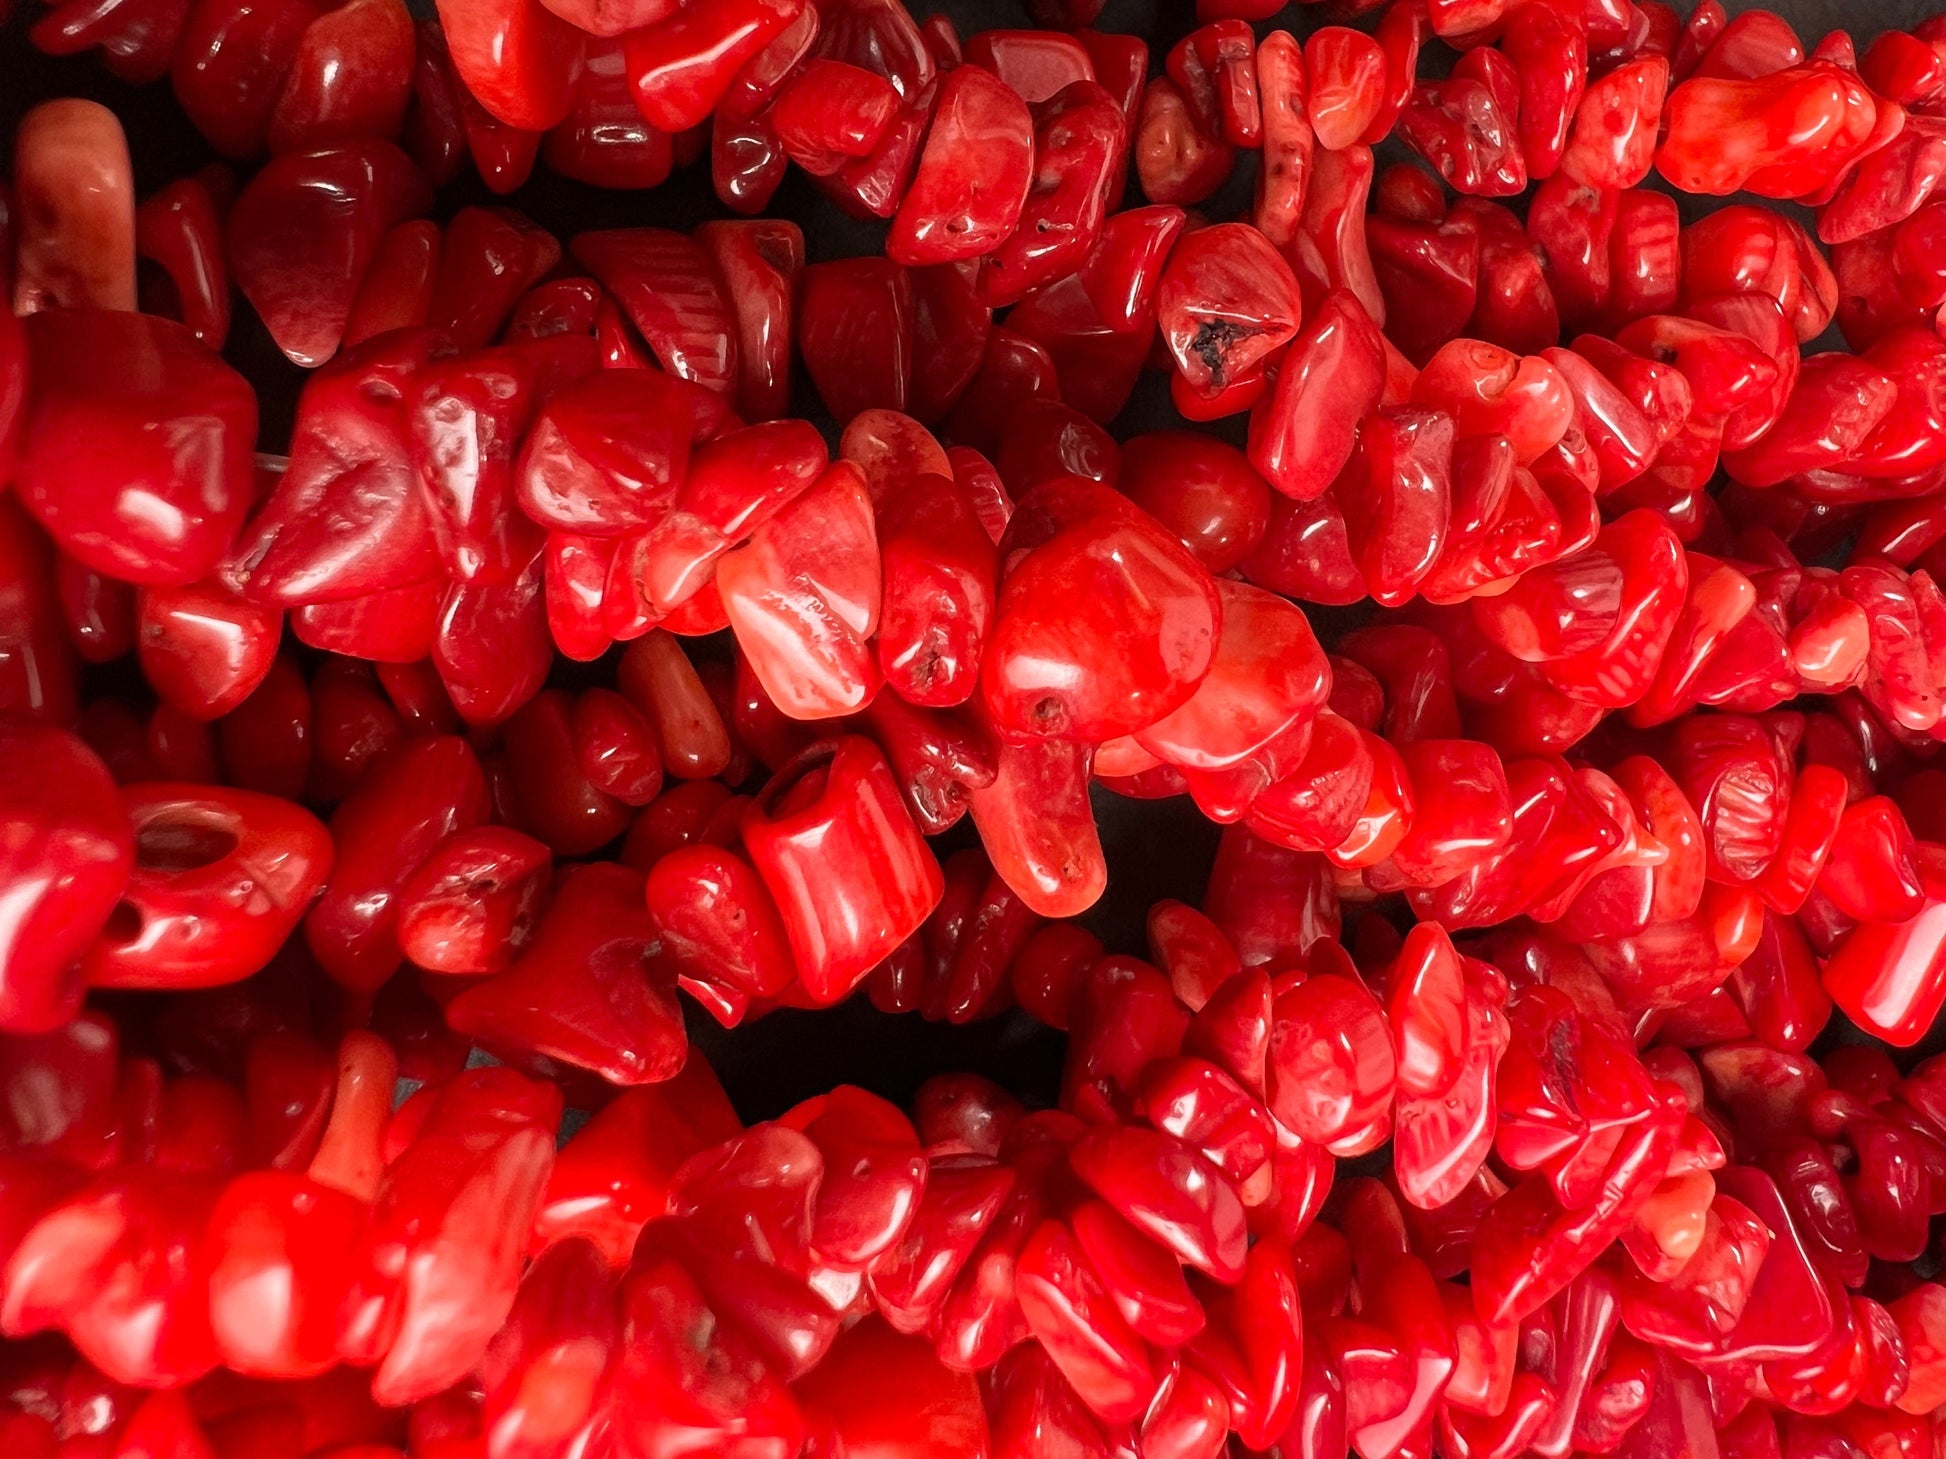 Bamboo coral raw freeform red sea coral nugget chip 4-8mm bead. 15” strand natural gemstone